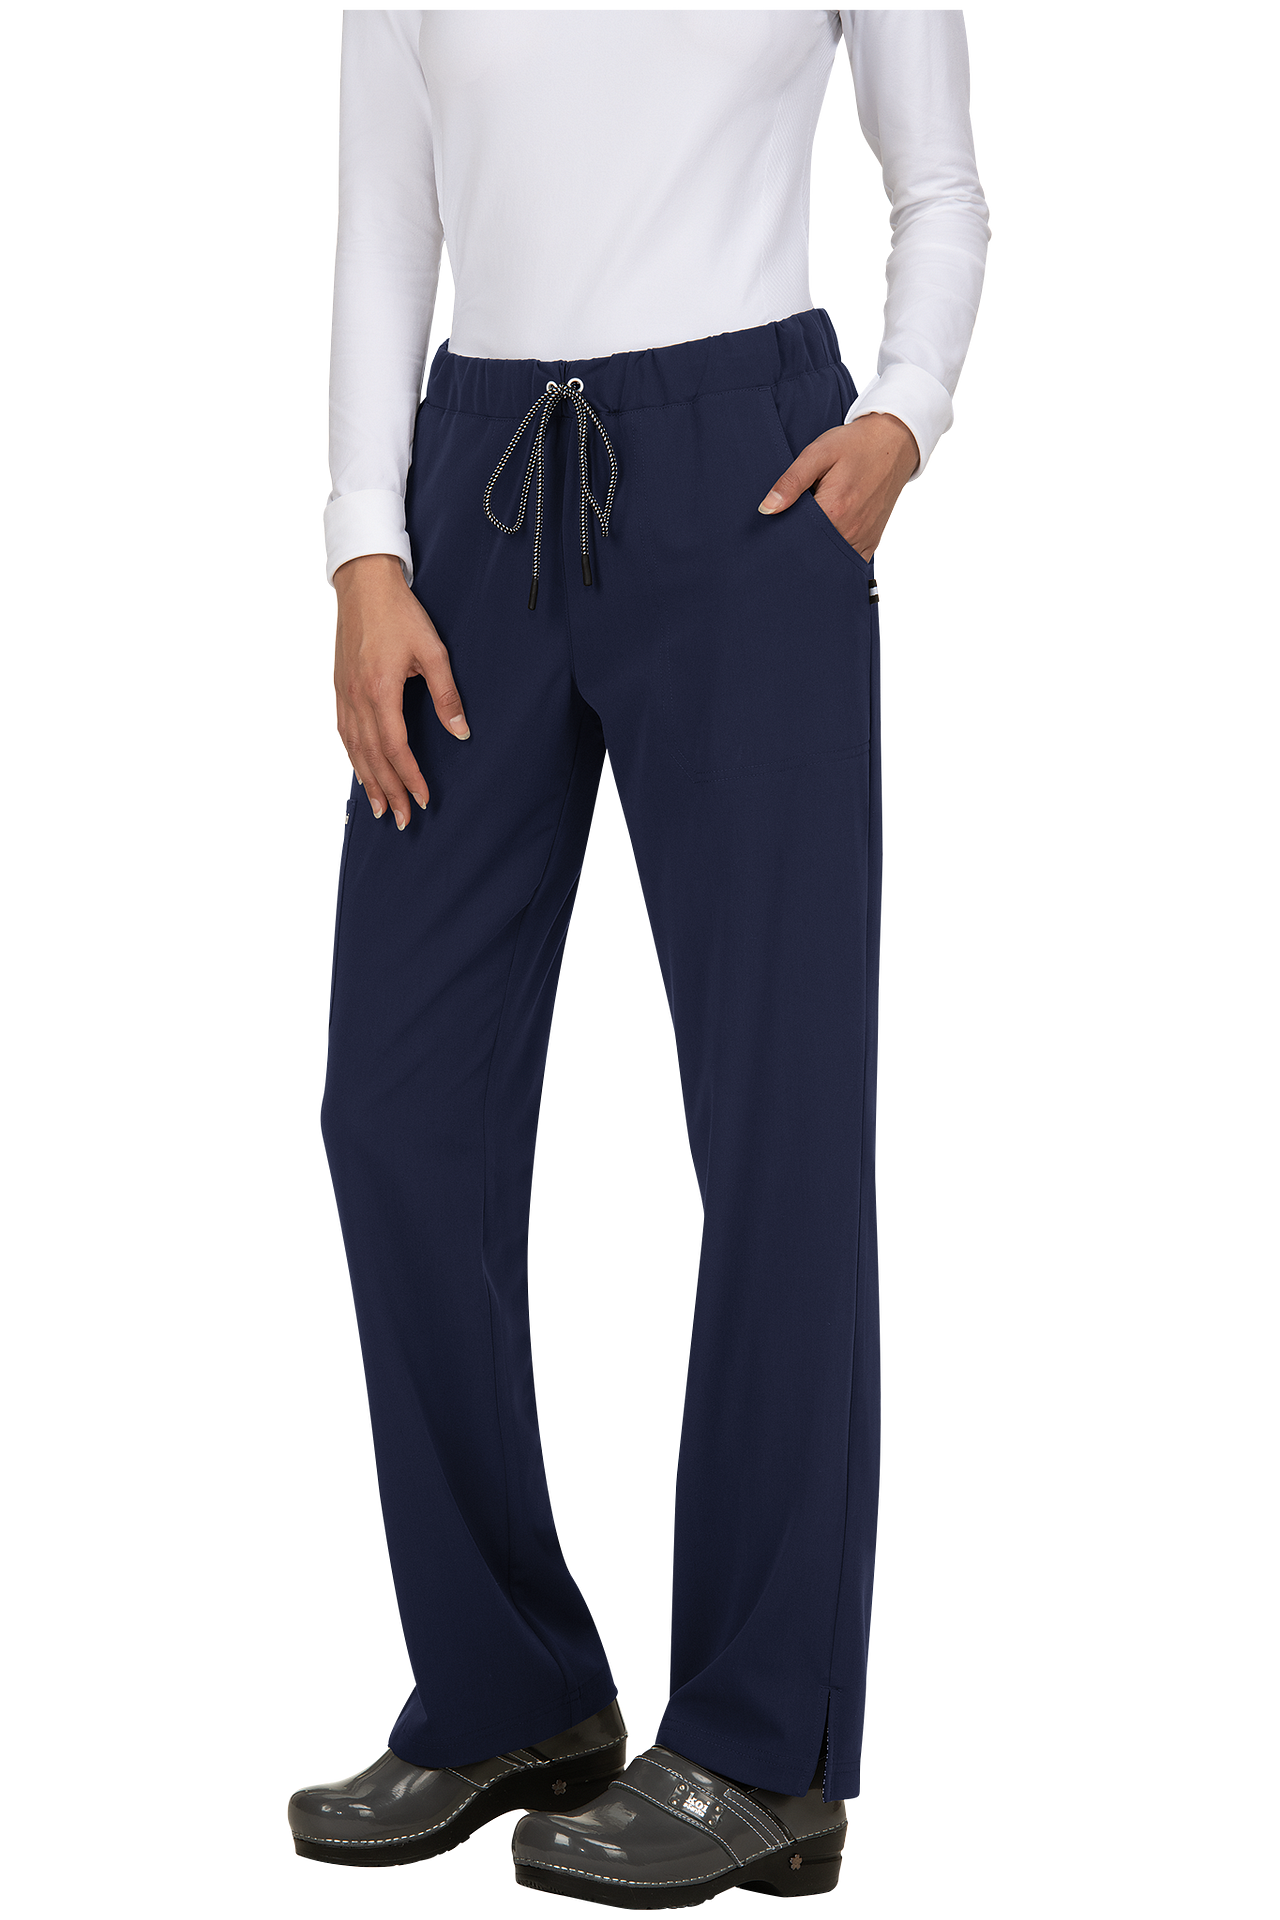 Koi Scrub Pant Next Gen Everyday Hero in Navy at Parker's Clothing & Shoes.